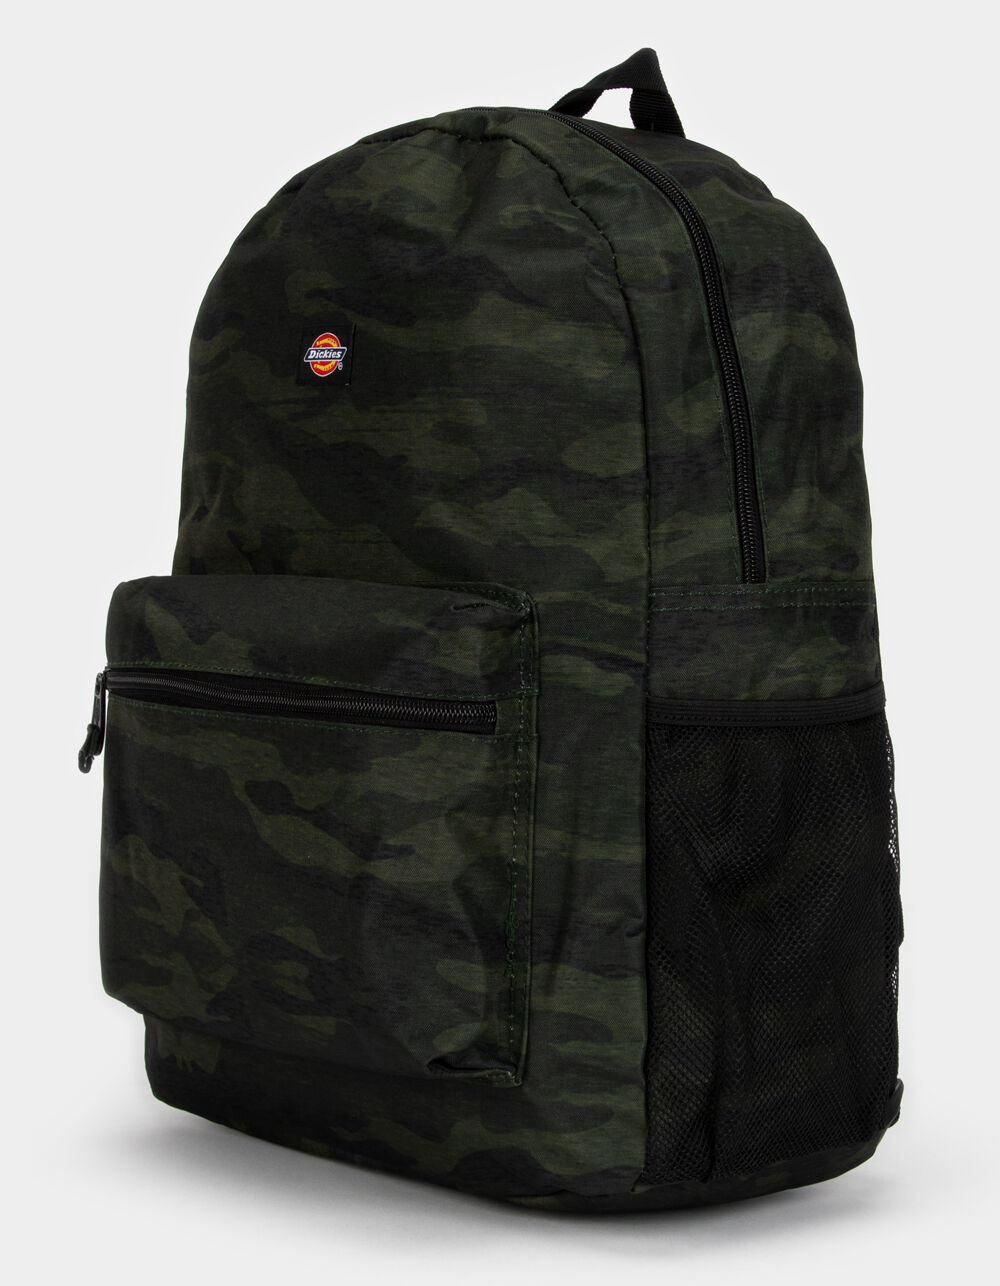 Dickies Student Backpack 20 Colors Everyday Backpack NEW 